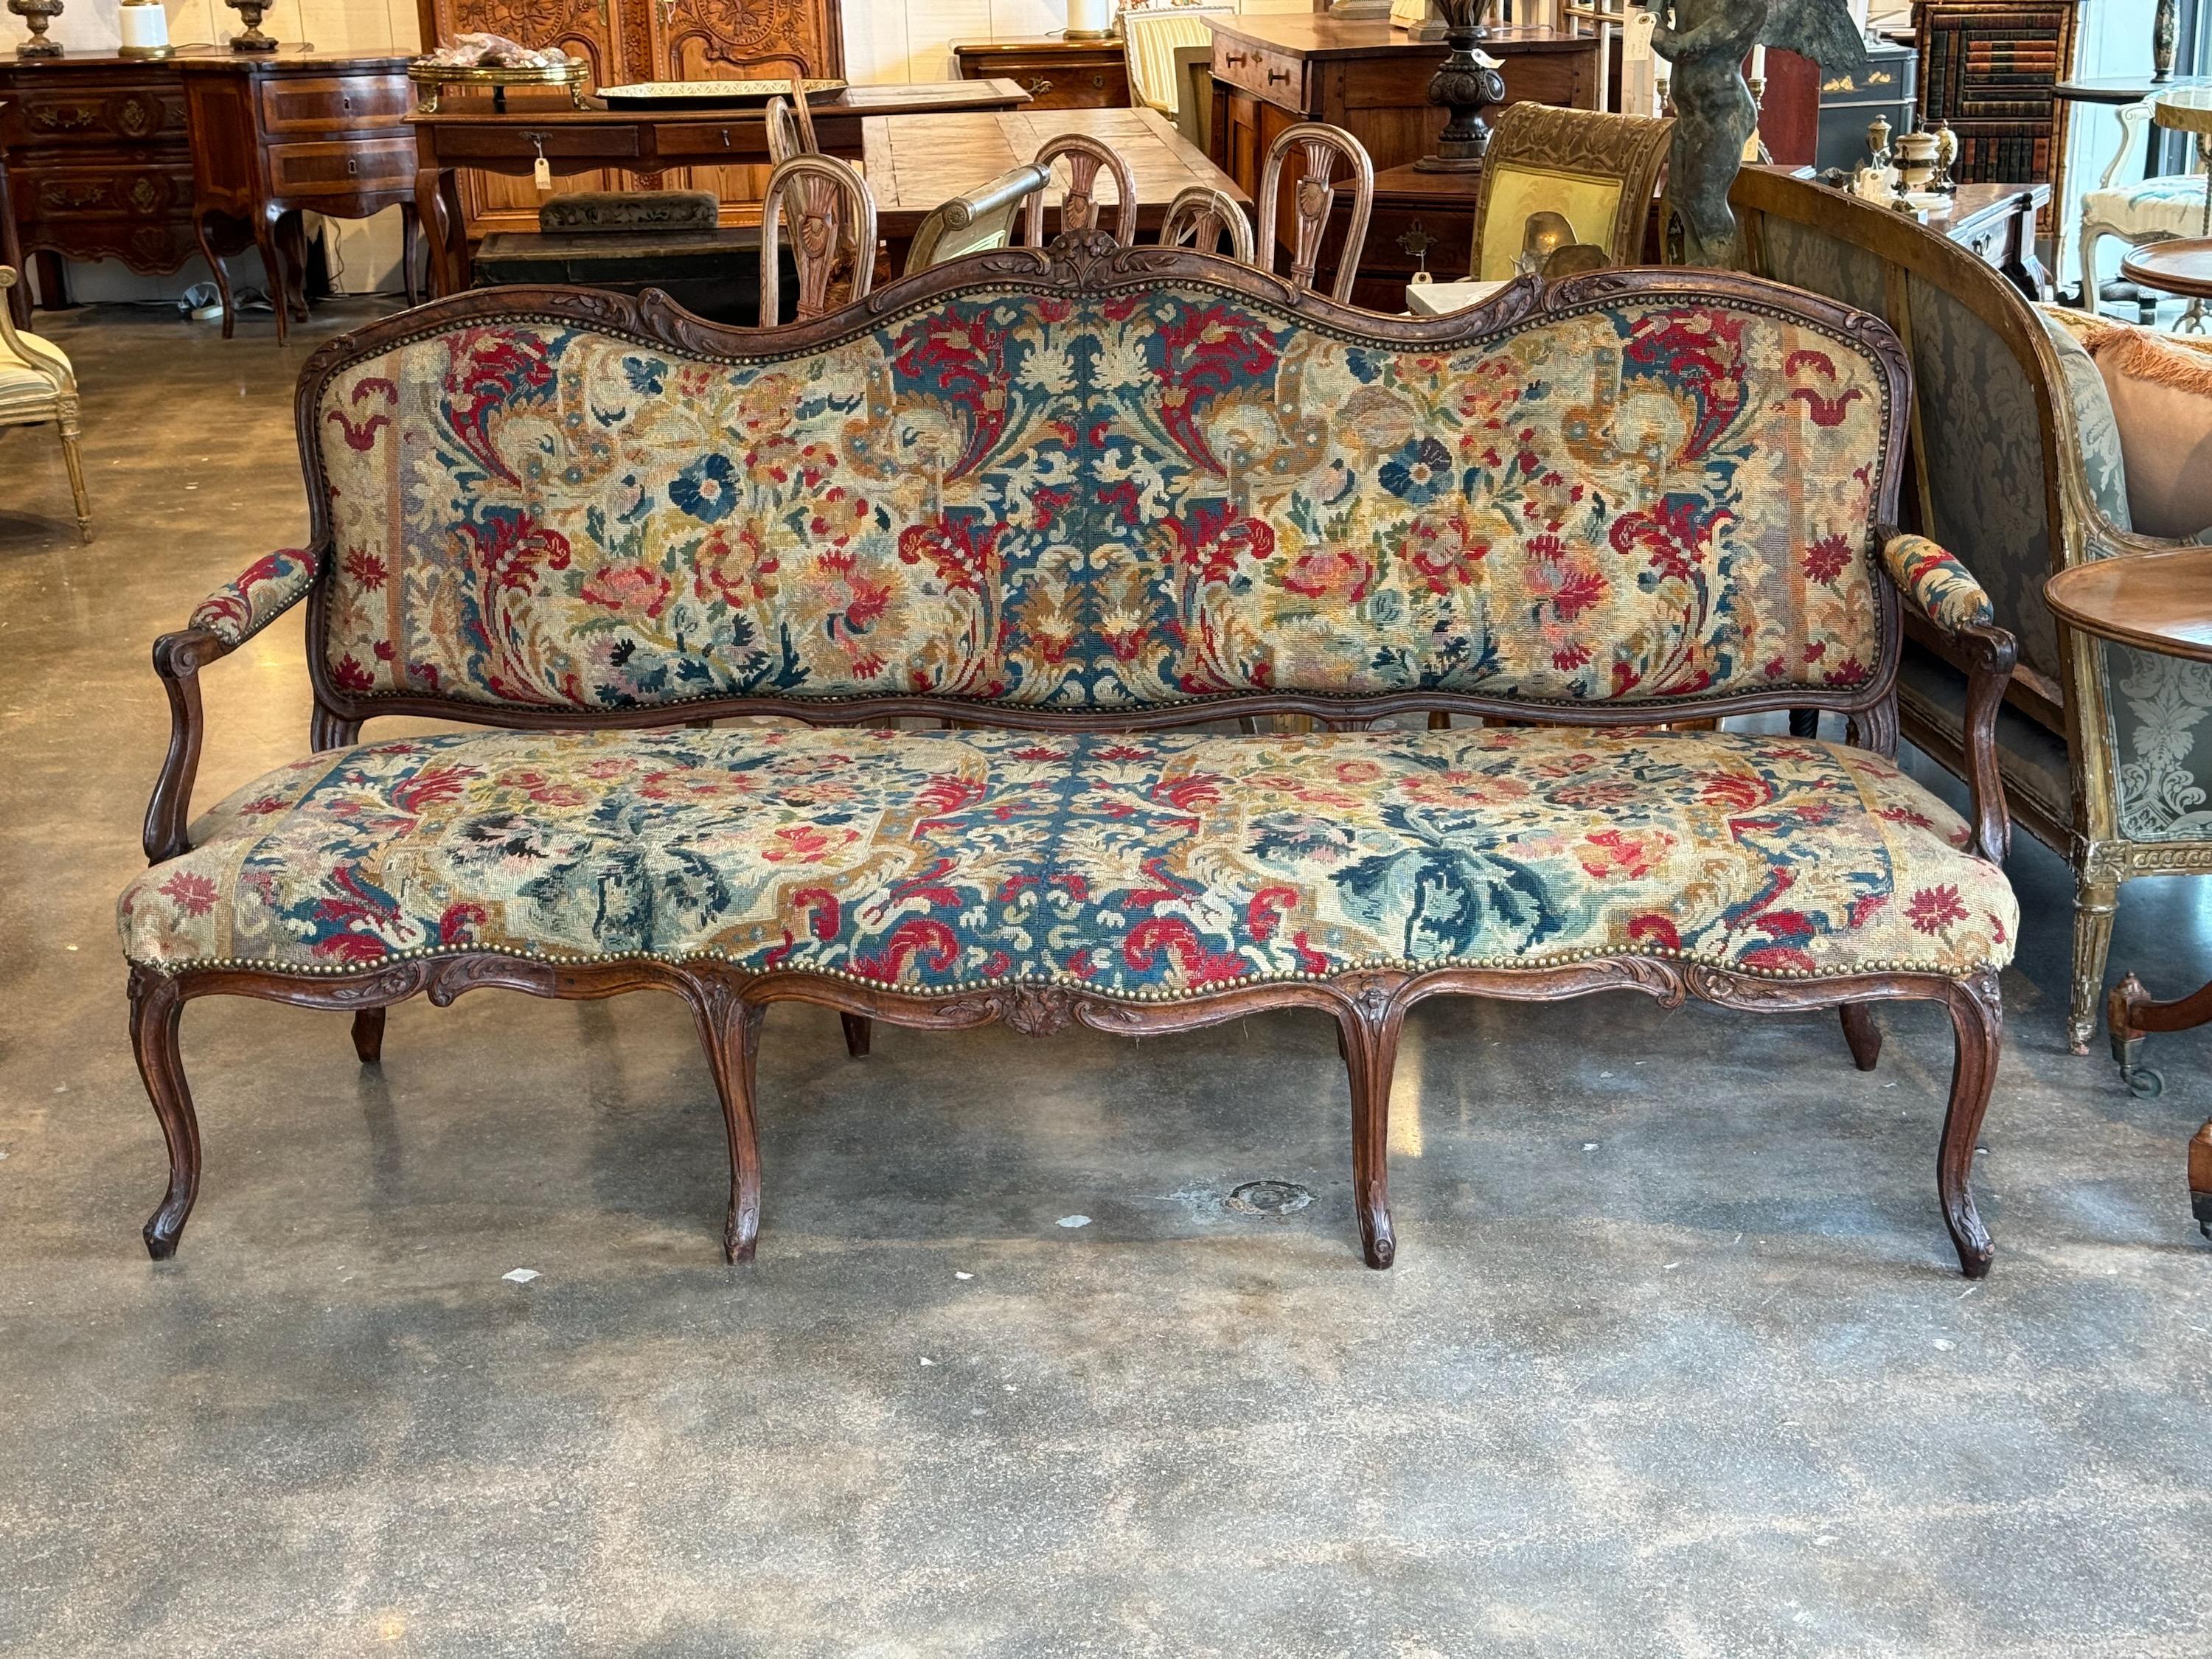 18th Century French Settee With Needlepoint Fabric In Good Condition For Sale In Charlottesville, VA